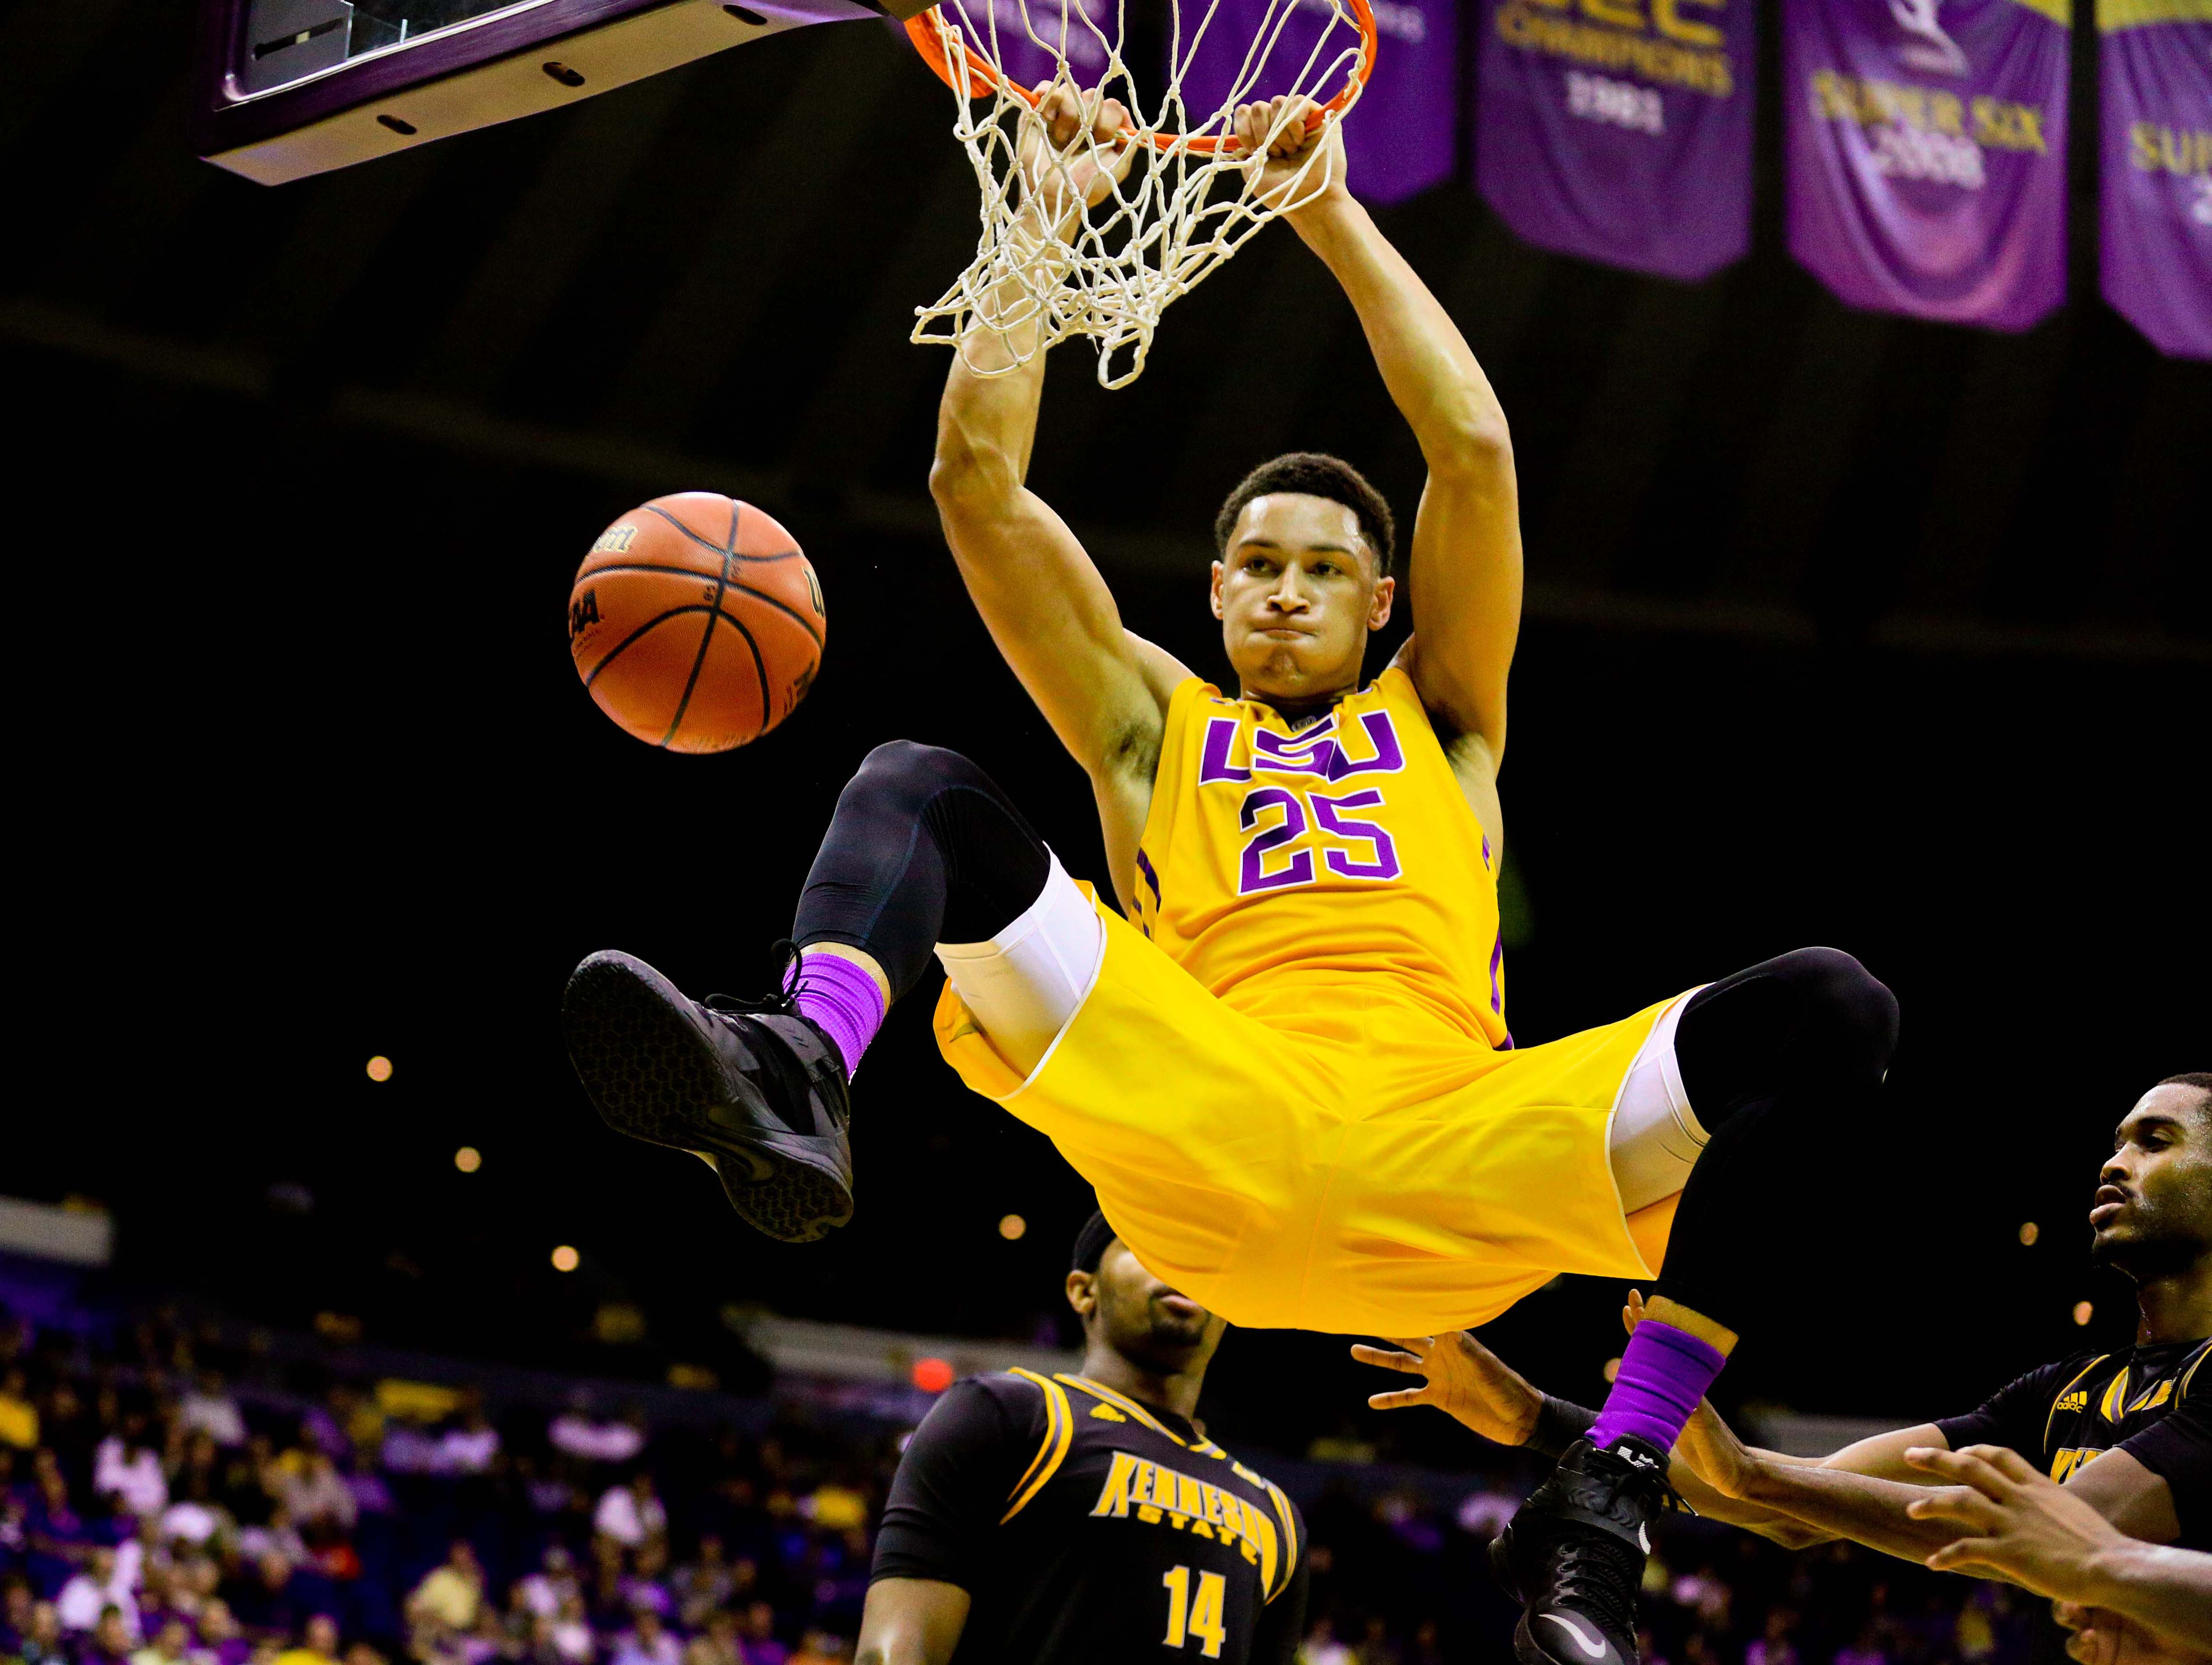 Simmons shines in 91-69 win over Kennesaw State